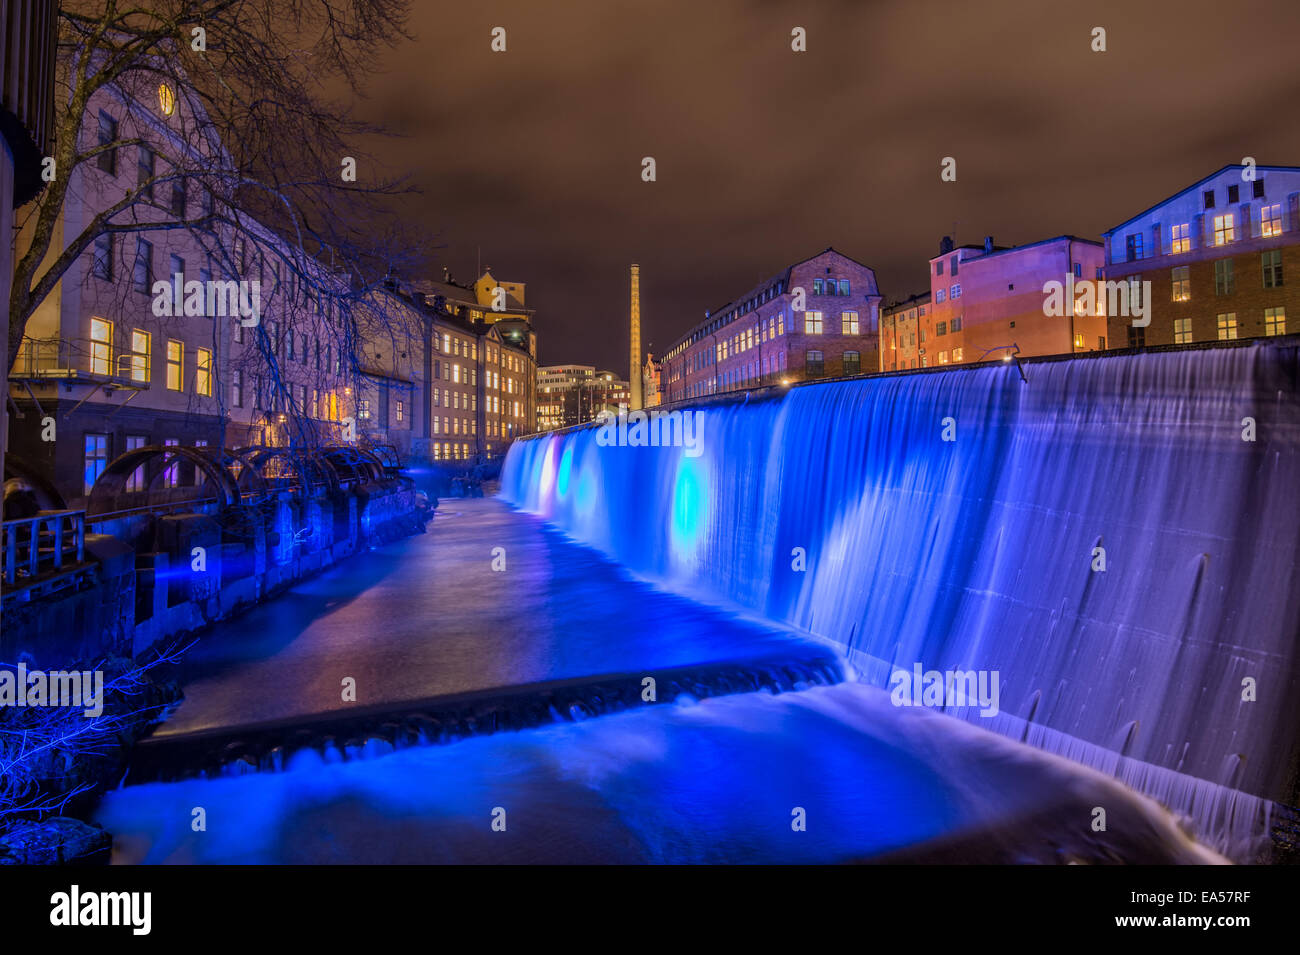 Blue Christmas - the illuminated waterfall in the famous industrial landscape in Norrkoping, Sweden at Christmas time Stock Photo